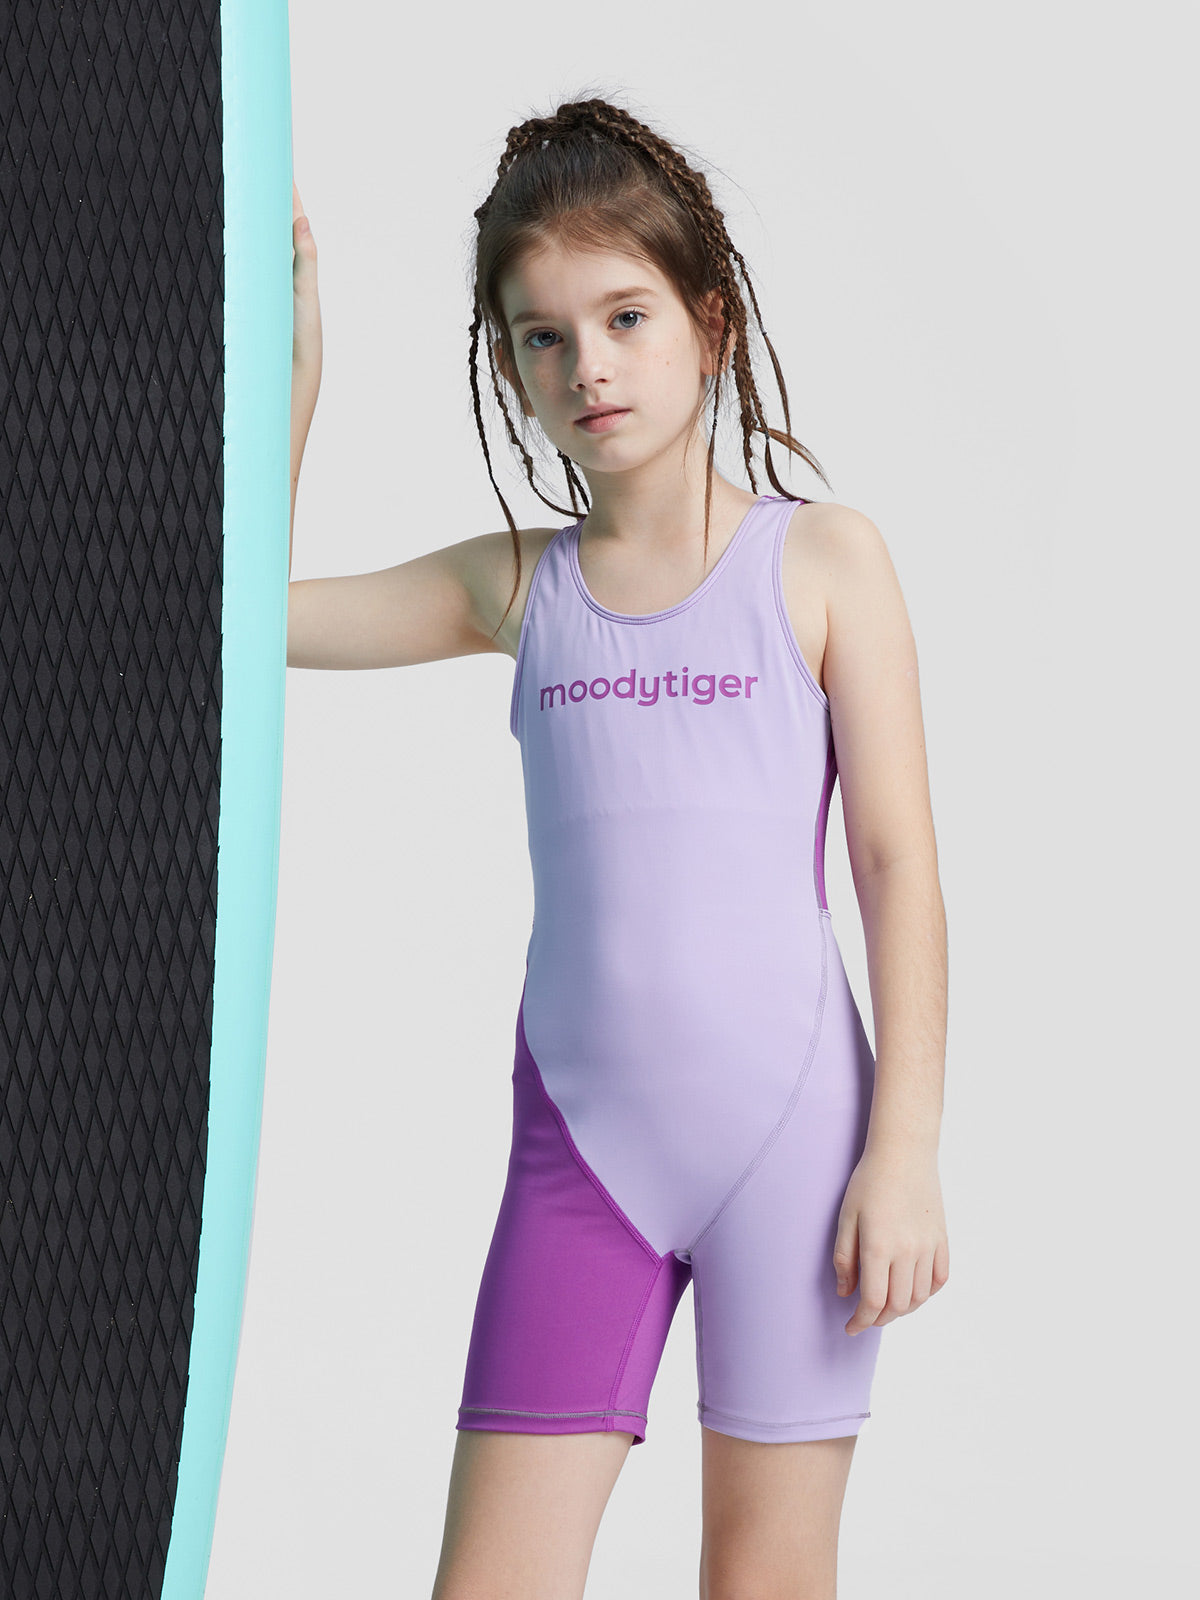 Fearless Swimsuit for Girls